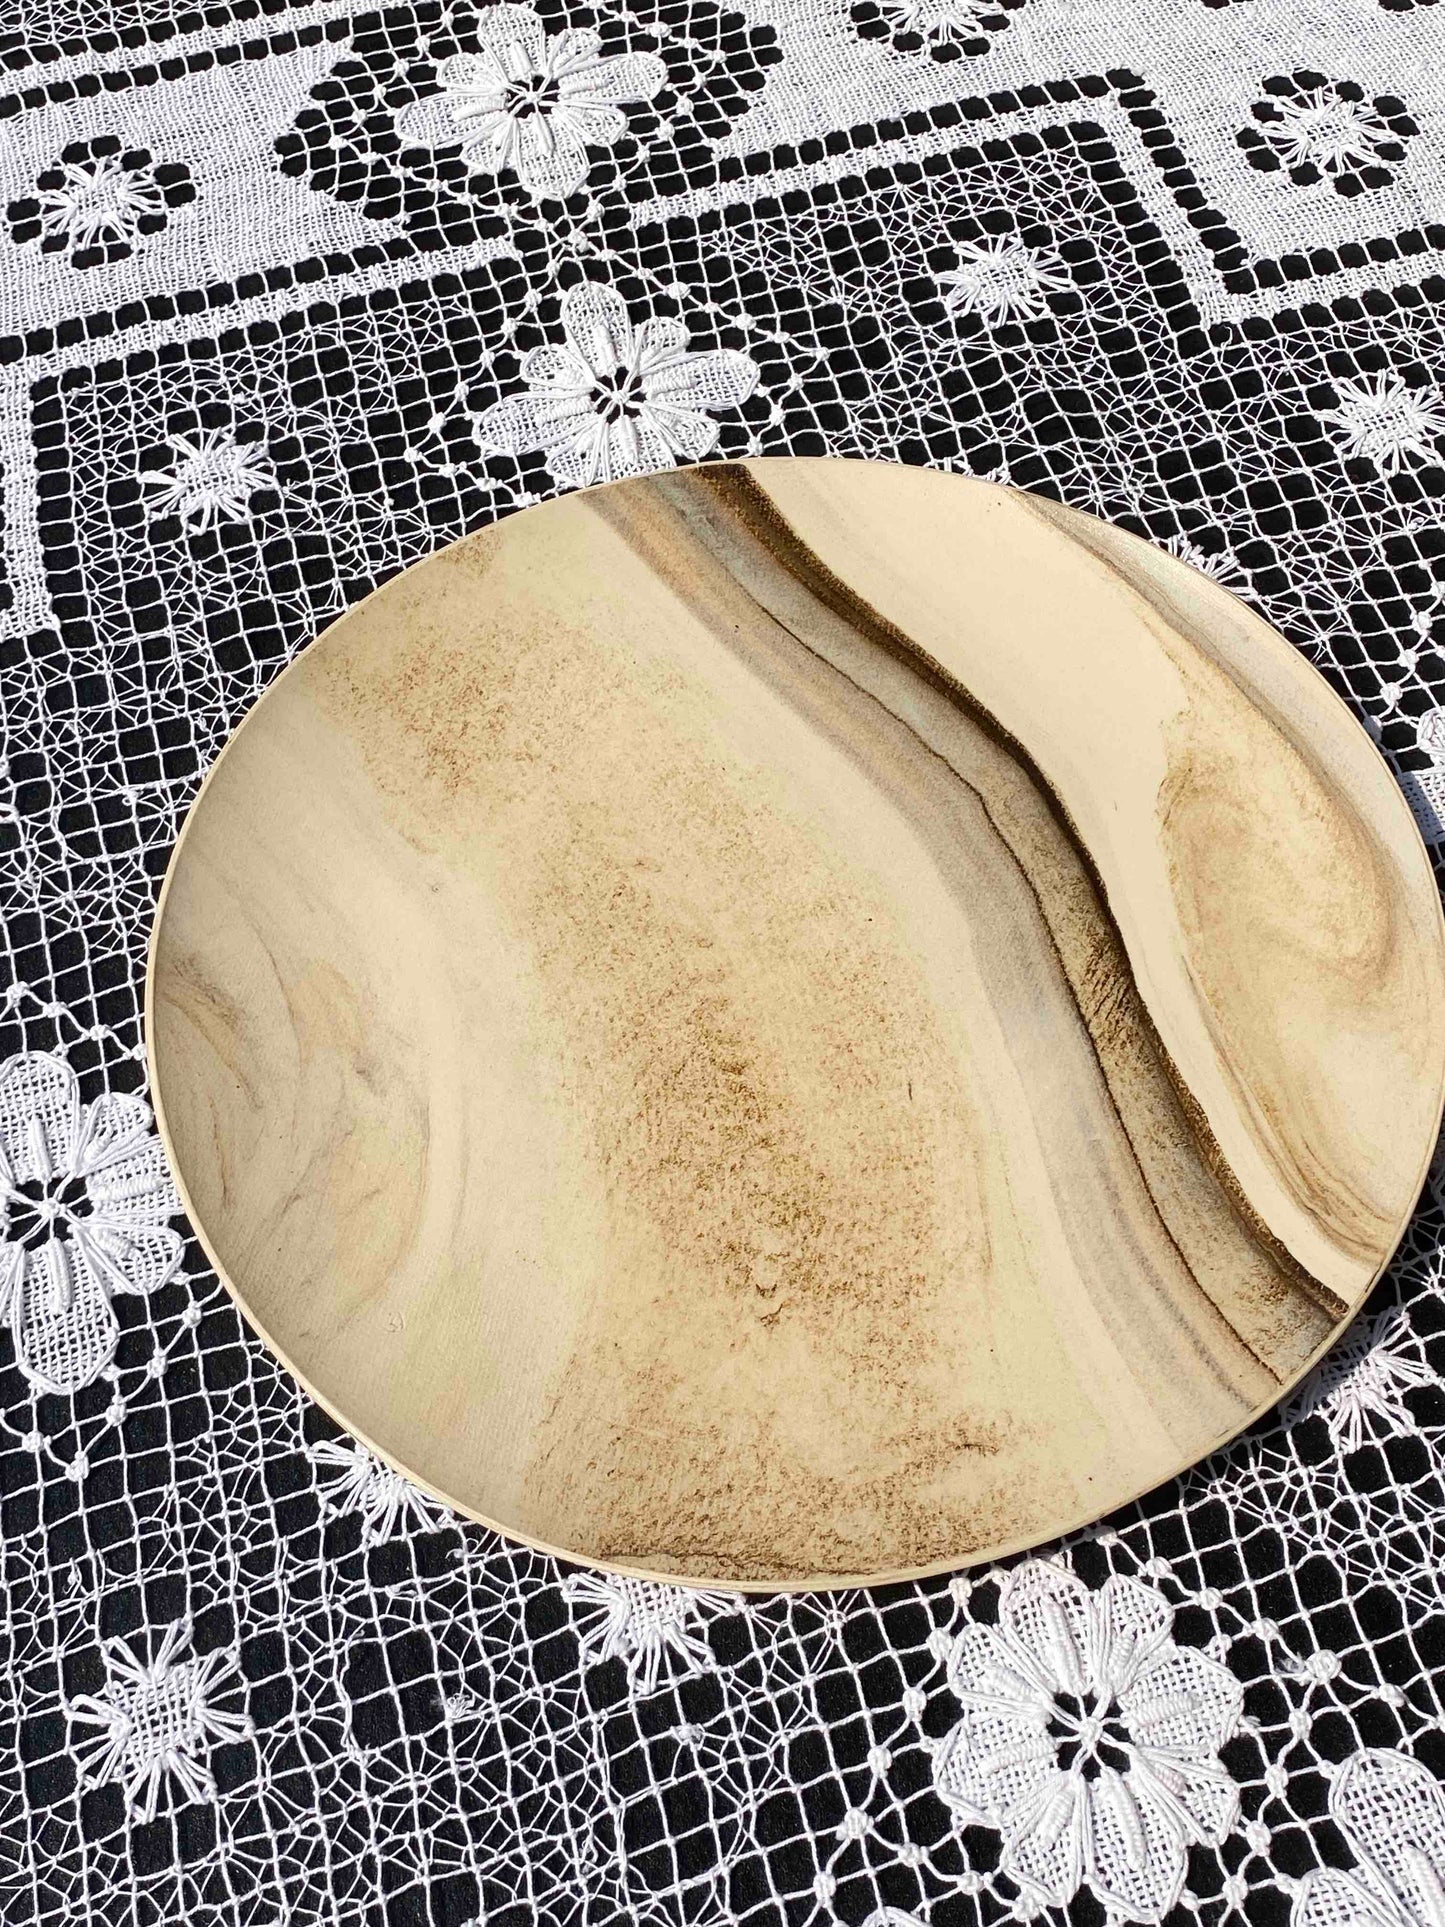 CAITLIN PRINCE - ONE OF A KIND LARGE MARBLED PLATE